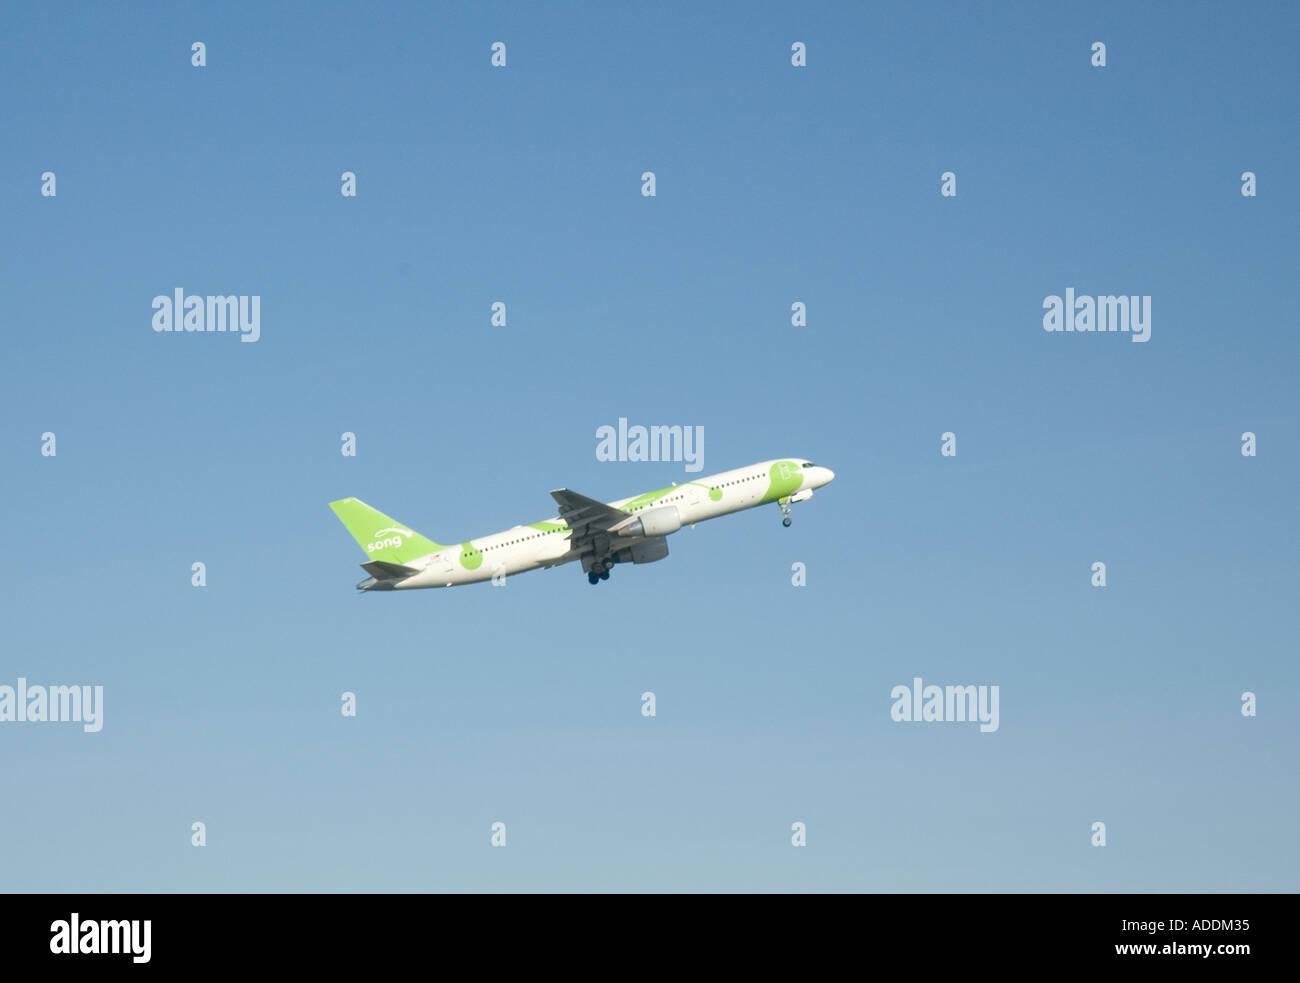 A Song Airlines passenger jet during takeoff Stock Photo